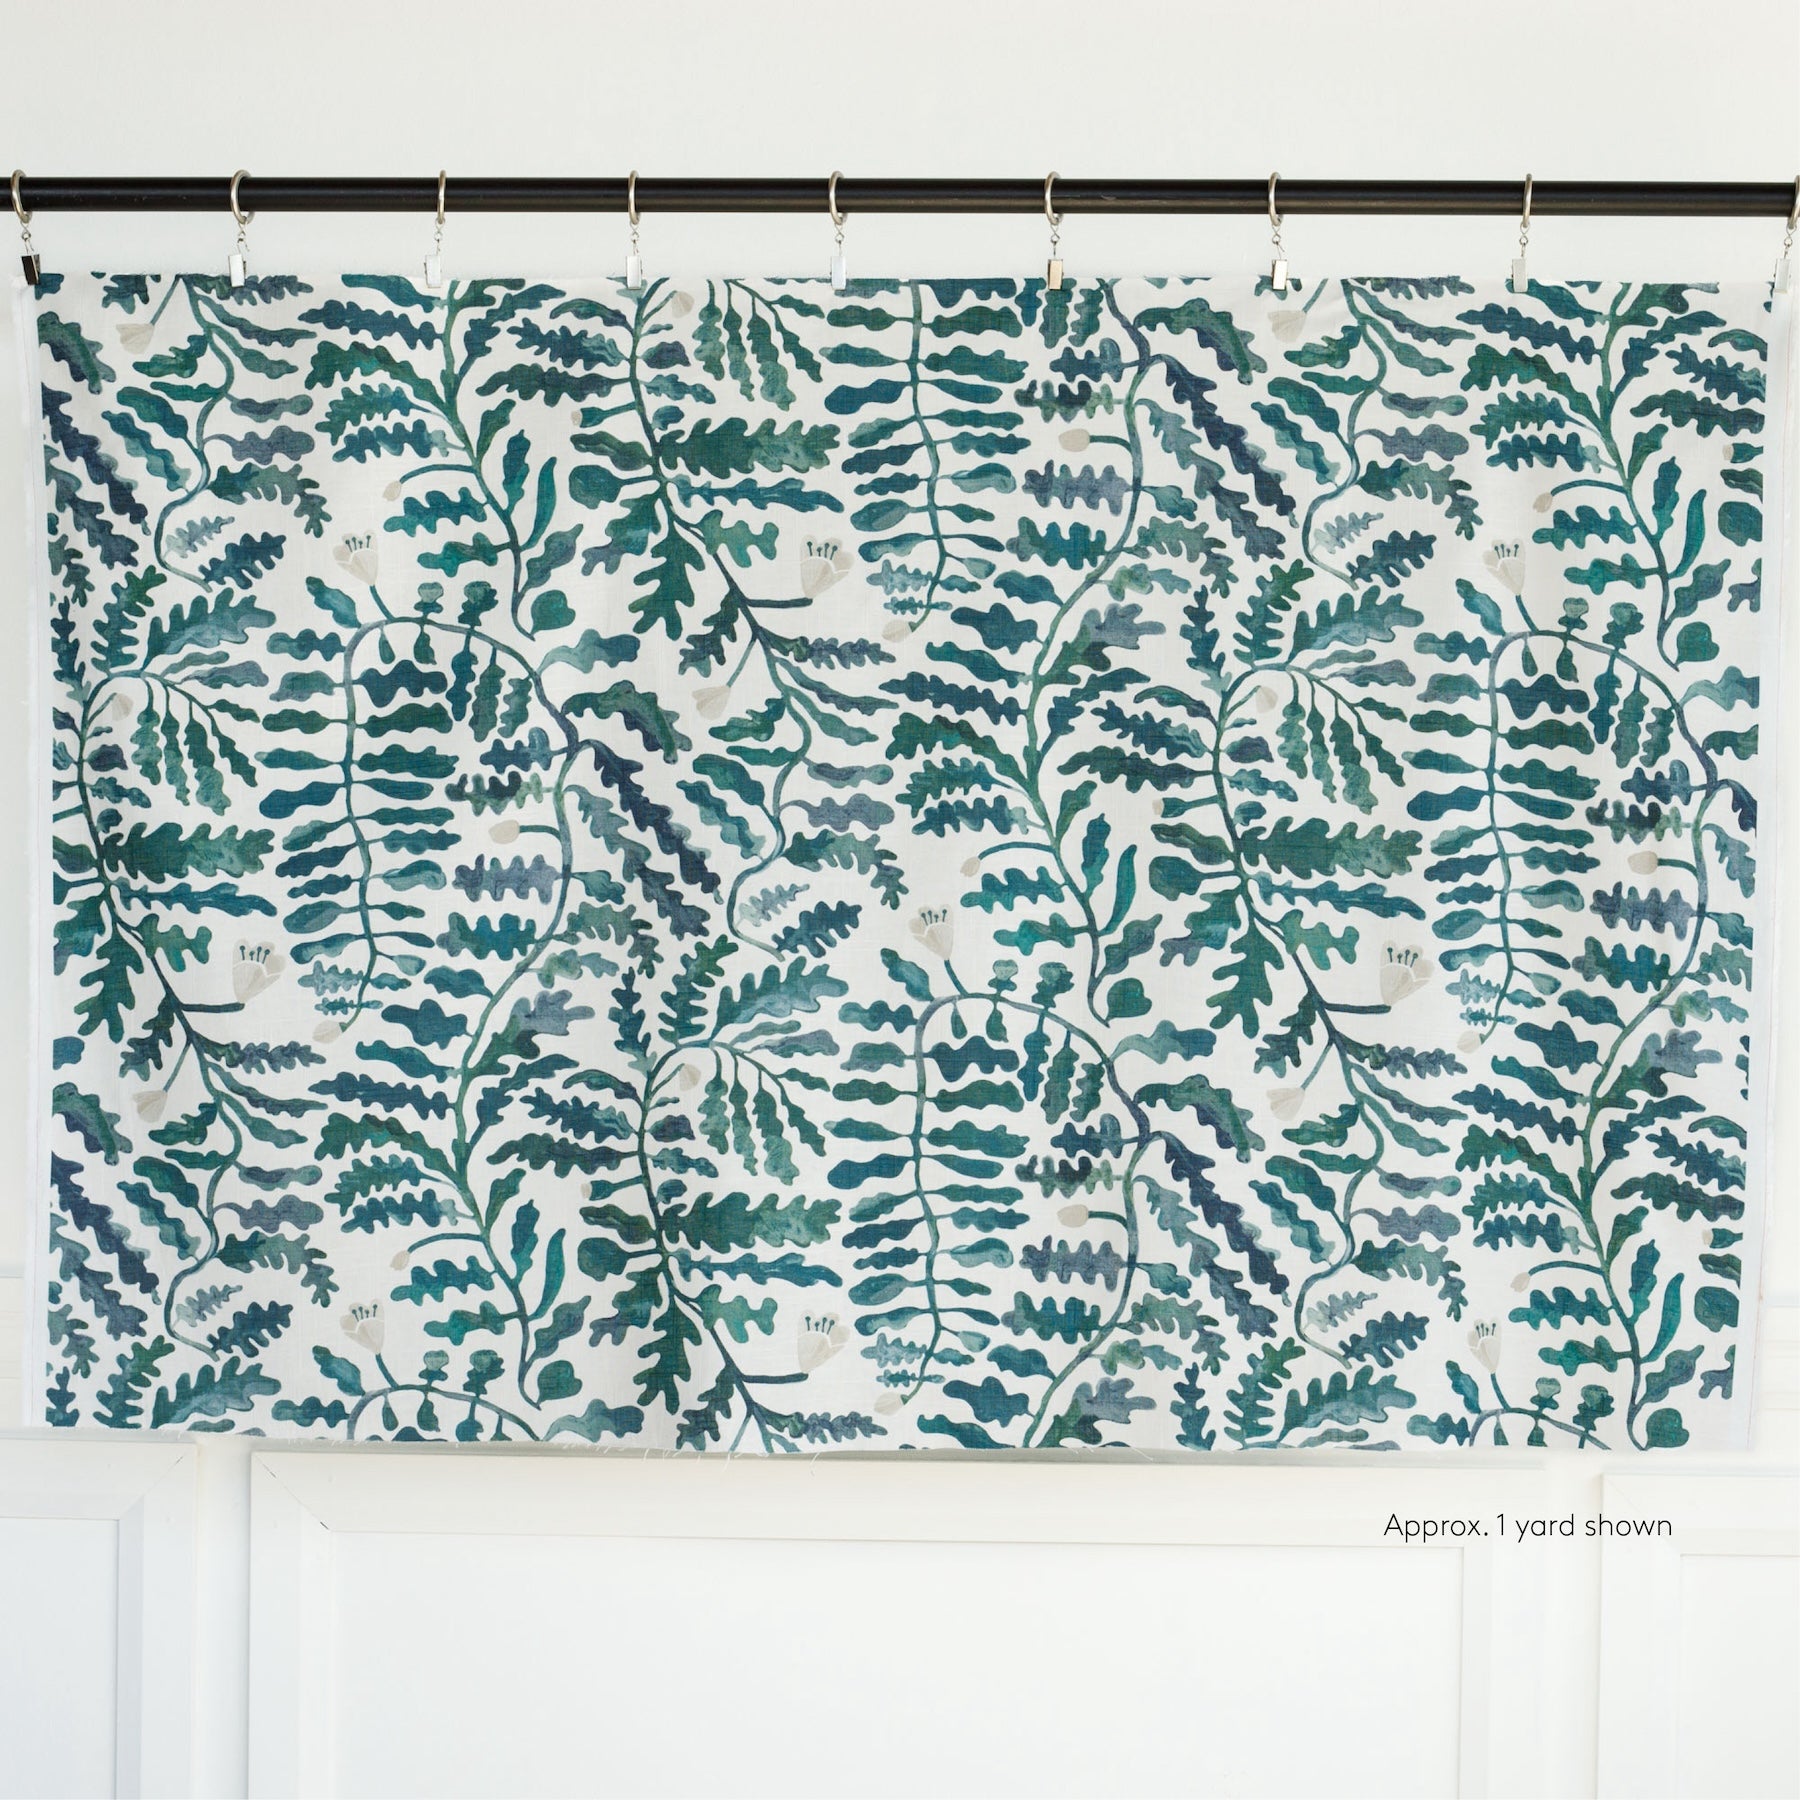 a teal and forest green and white leafy botanical linen blend fabric : one yard cut